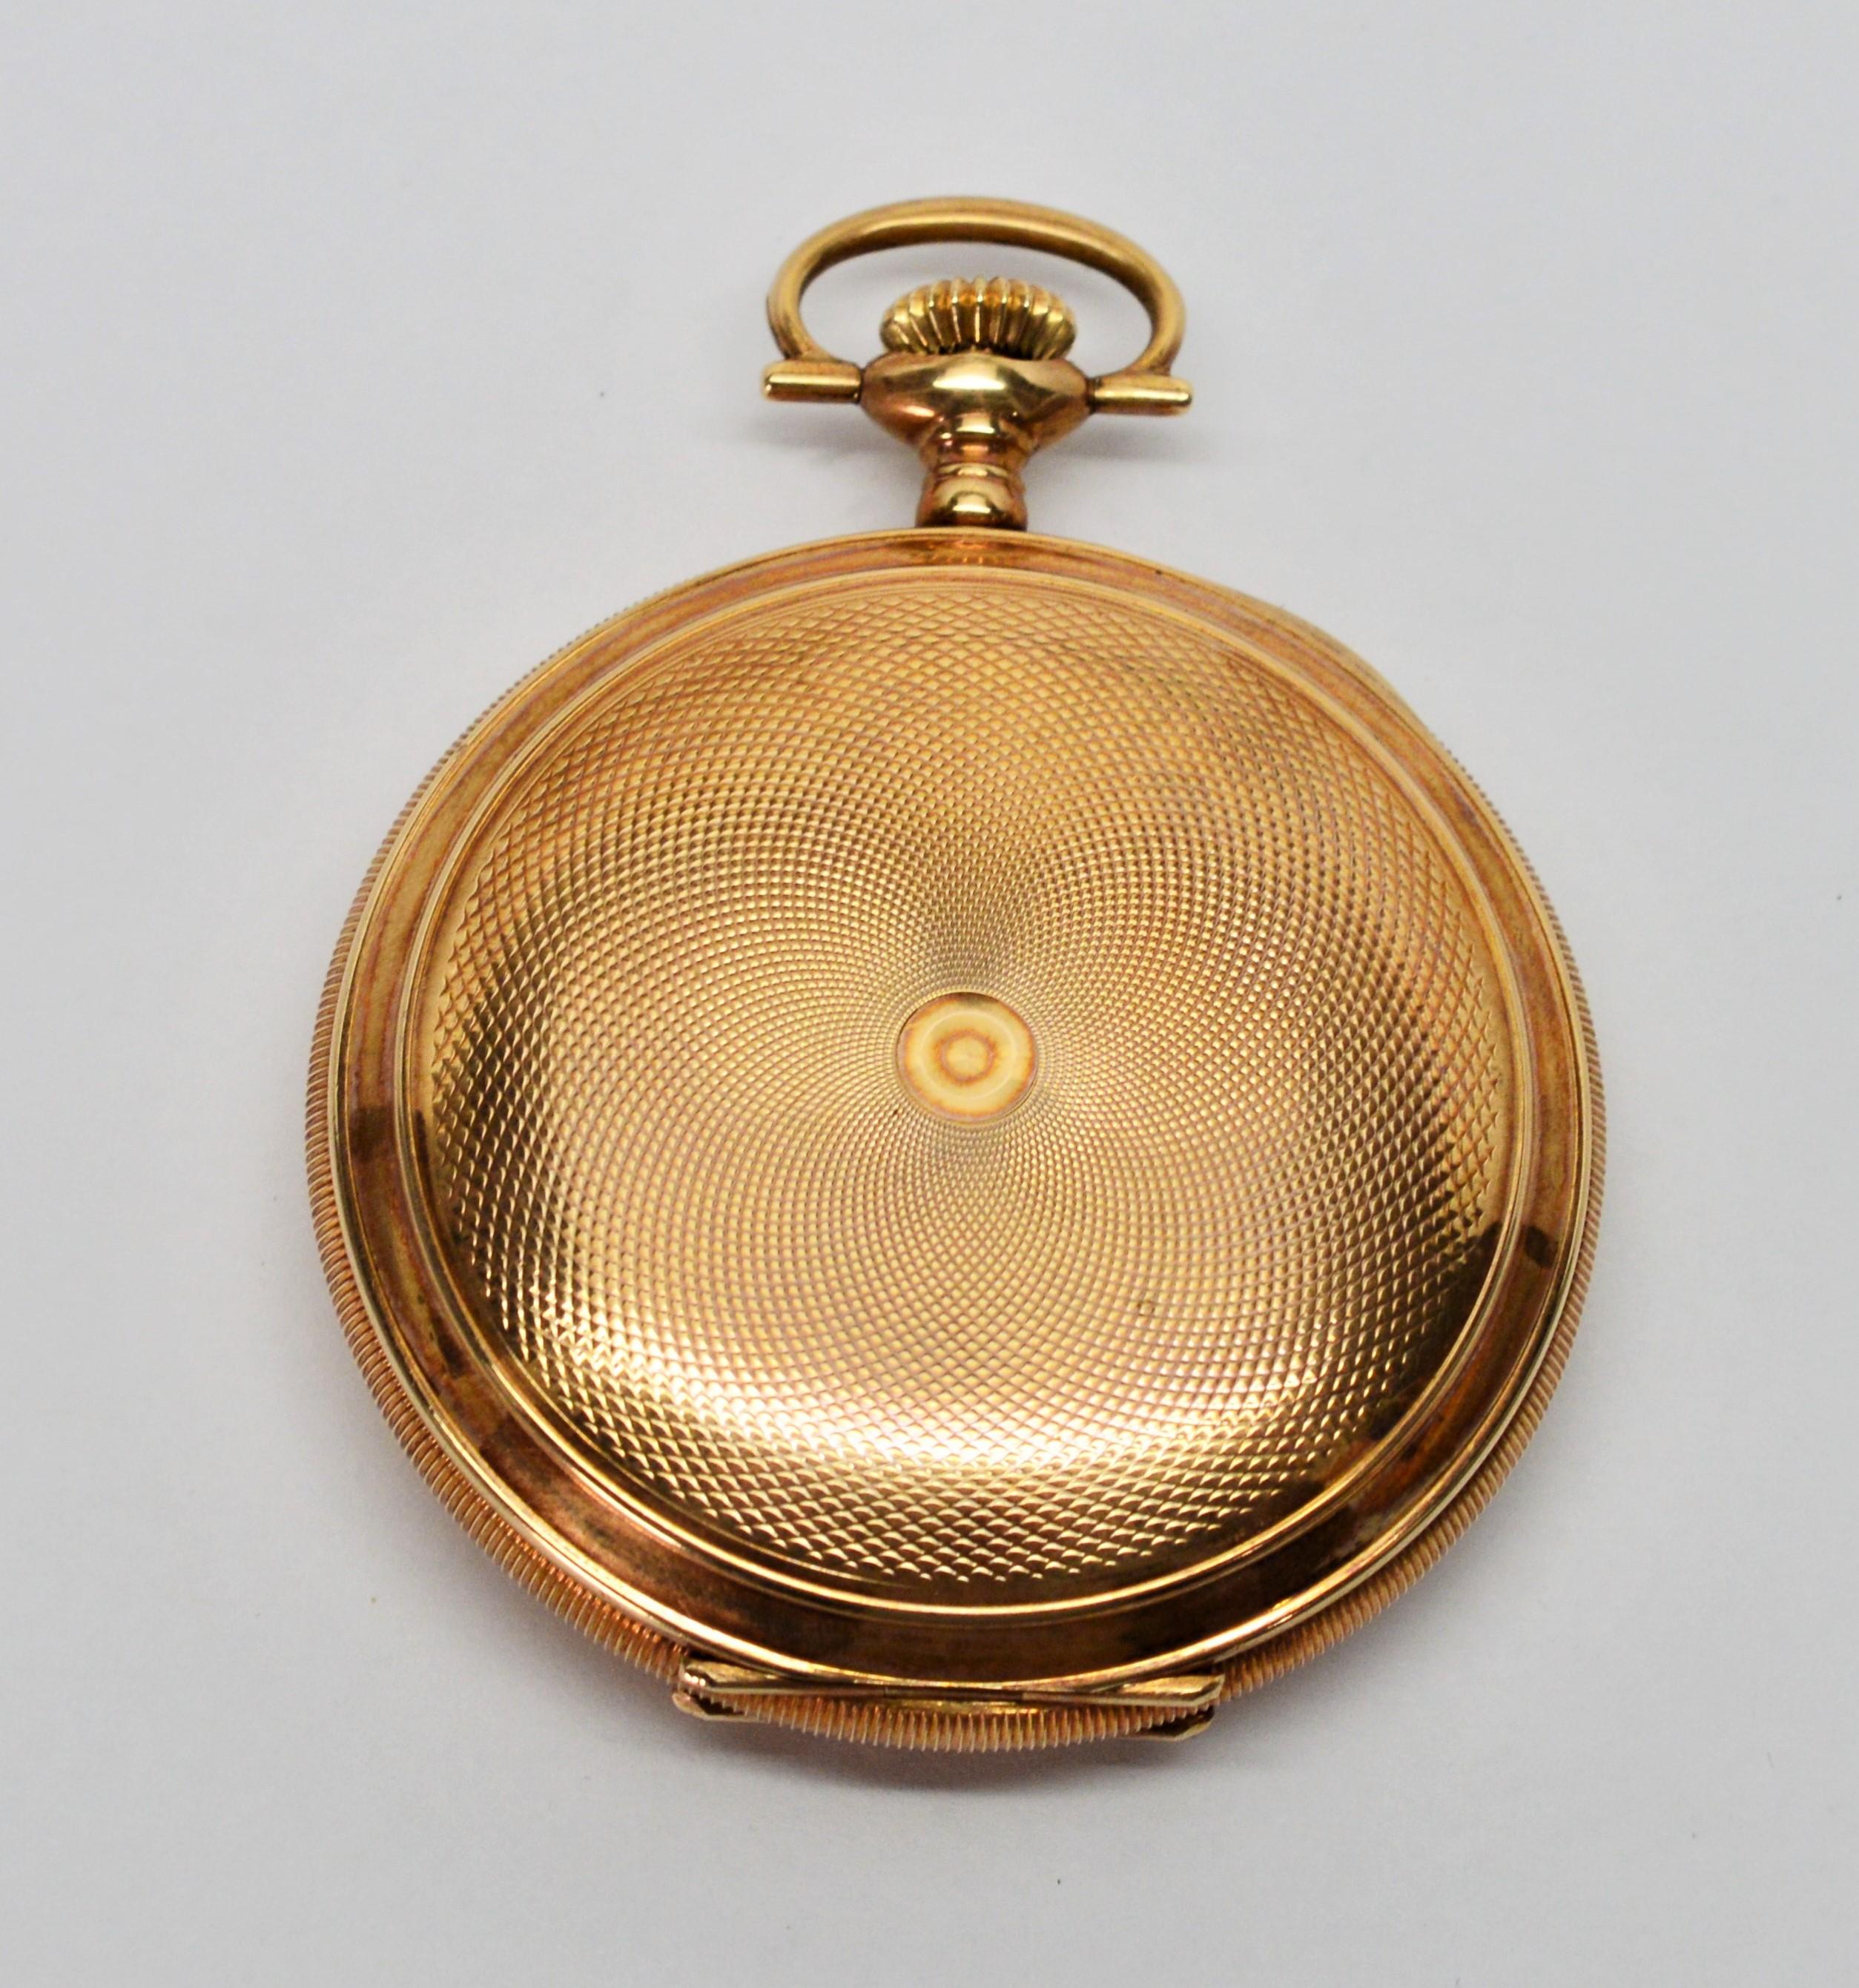 American Waltham Co. Antique Yellow Gold Pocket Watch 7